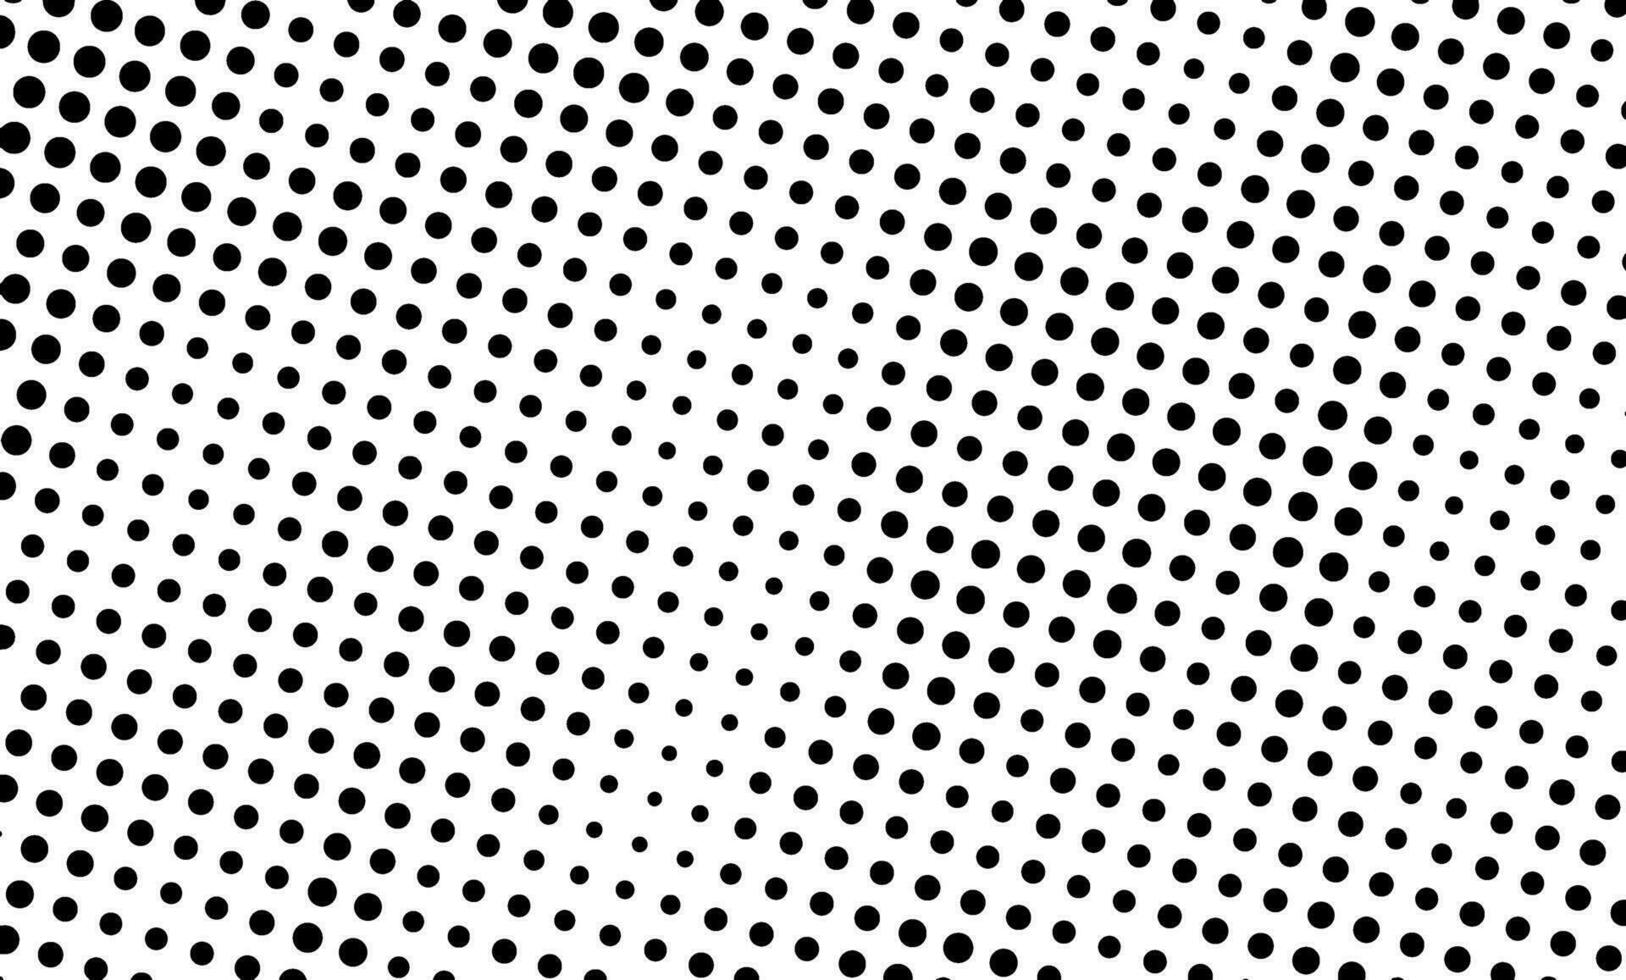 a black and white dotted pattern background vector